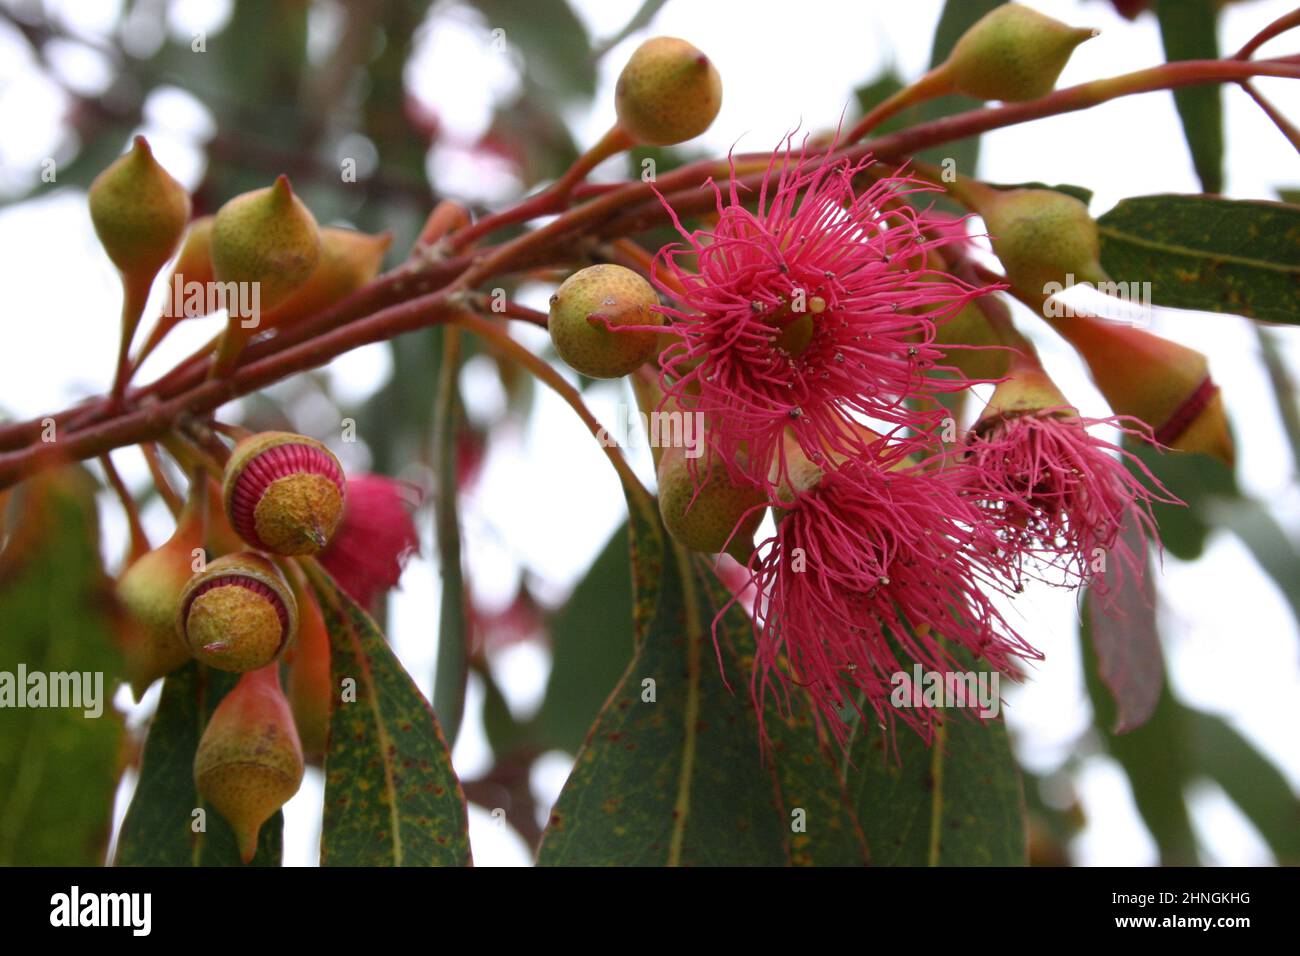 CORYMBIA FICIFOLIA (SYN EUCALYPTUS FICIFOLIA) COMMONLY KNOWN AS RED FLOWERING GUM. Stock Photo